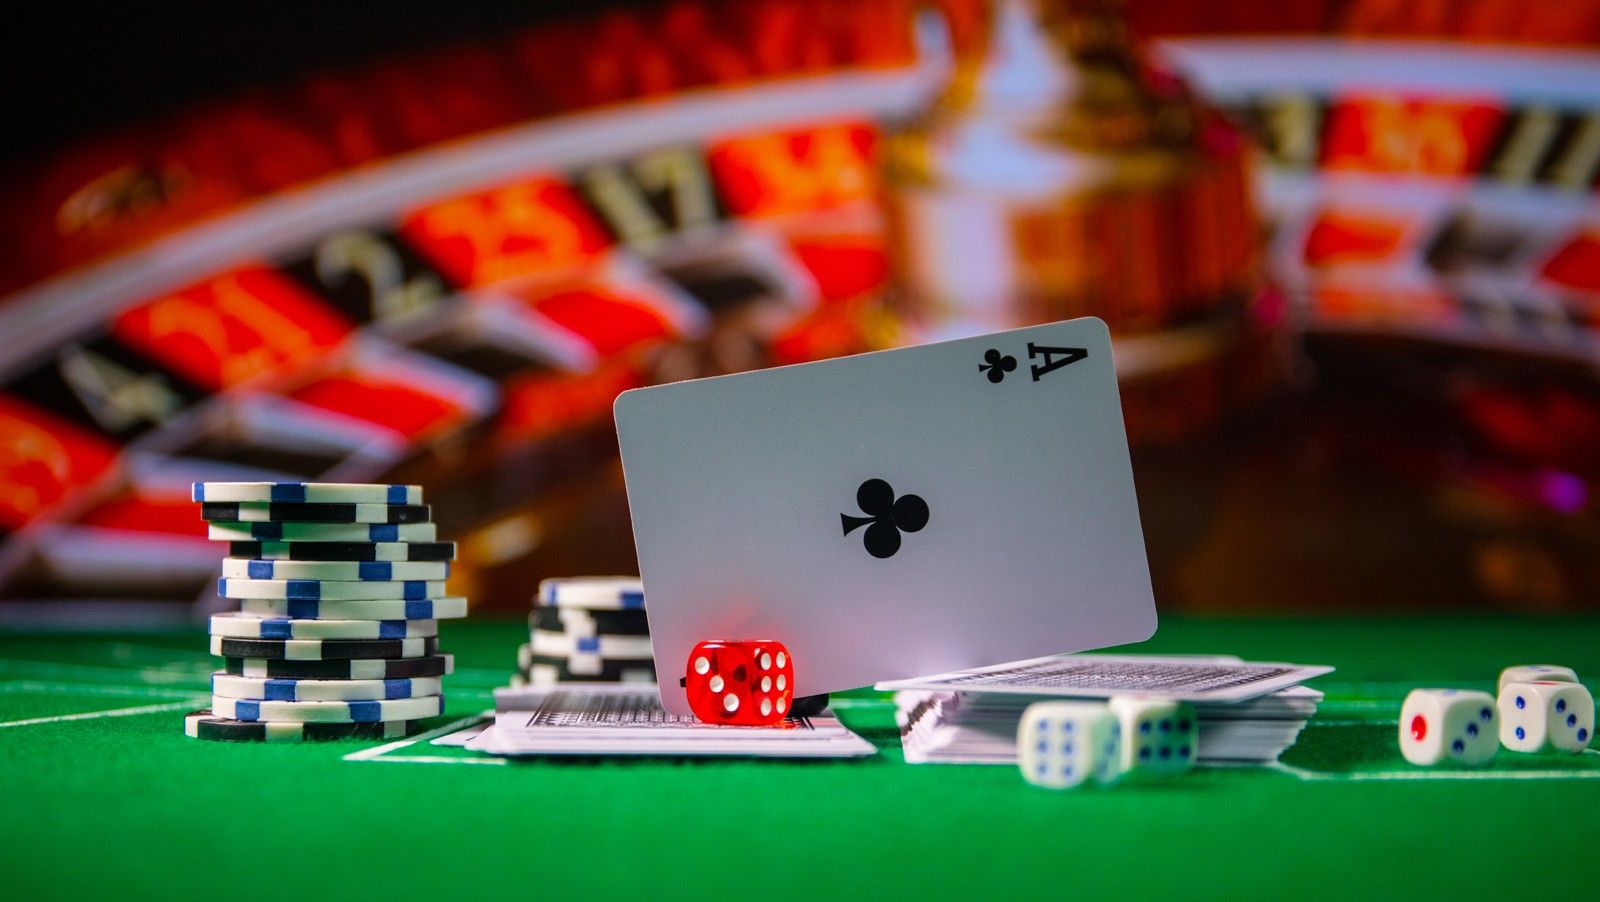 Know these online poker betting tips and win real cash!